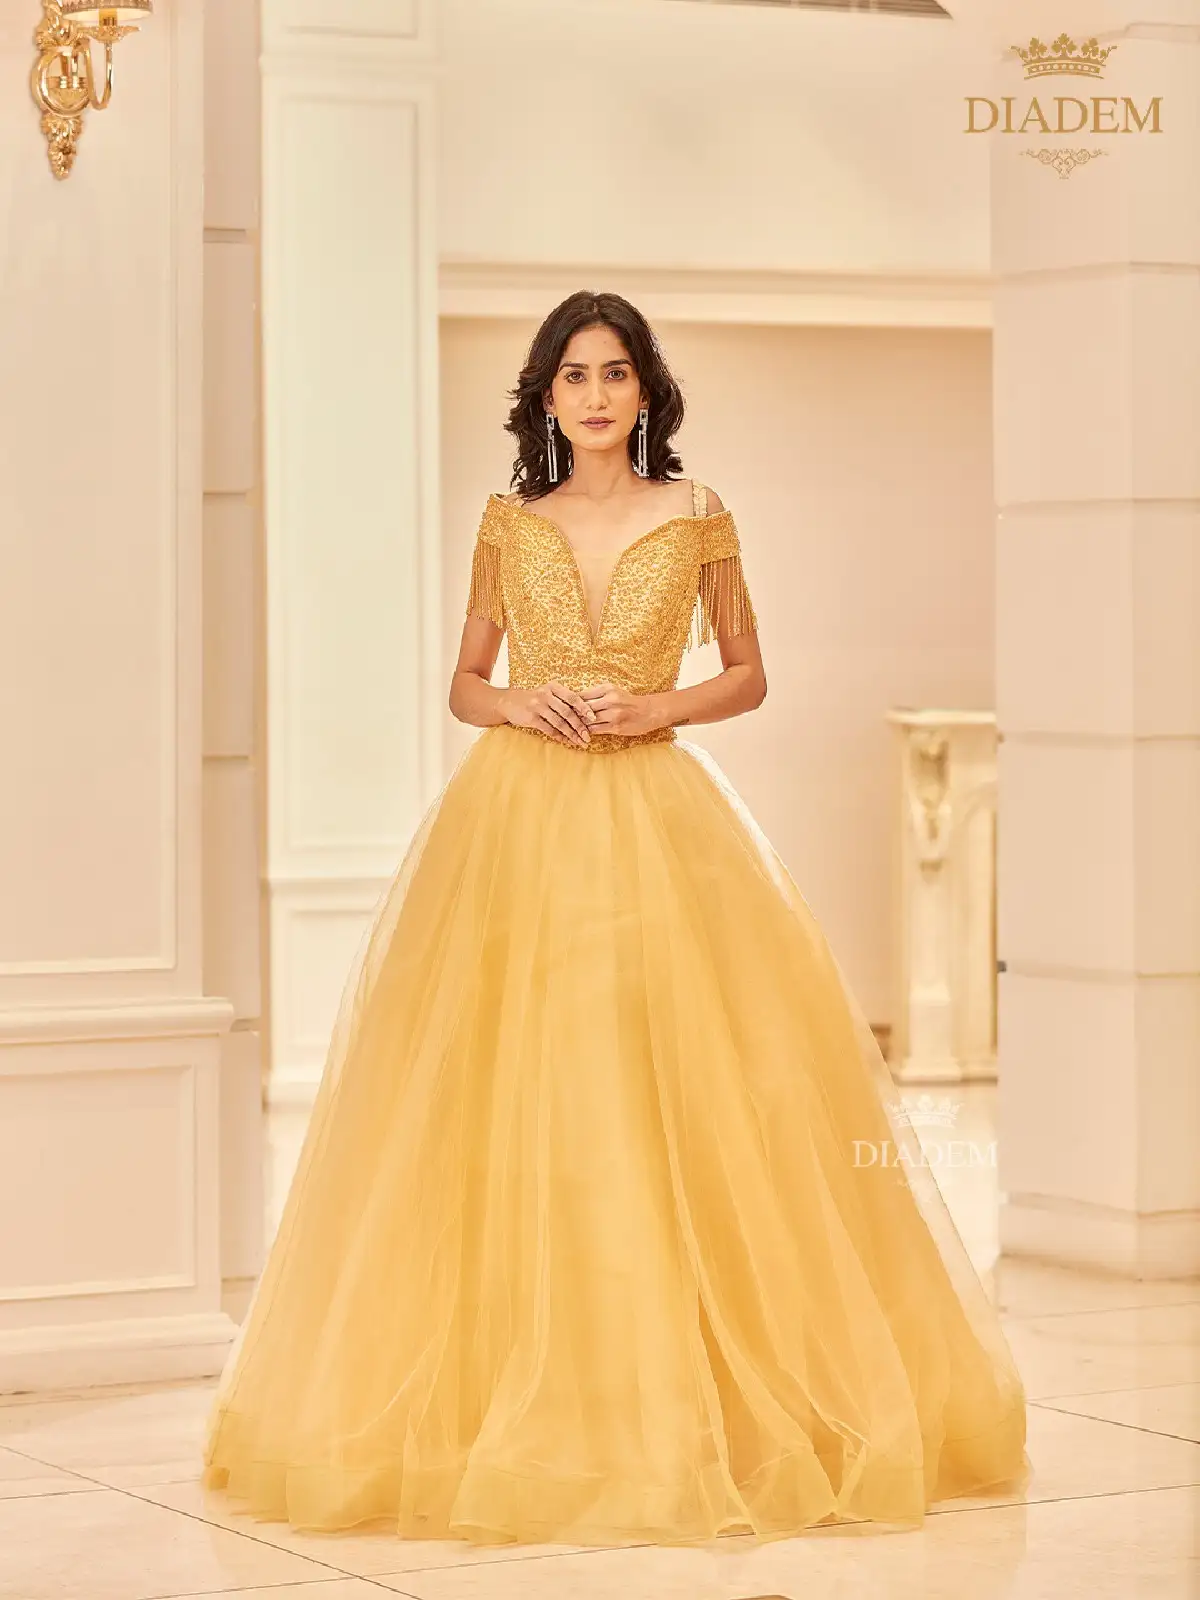 Stunning Gowns That Will Make You Beautiful | by Diadem store | Medium